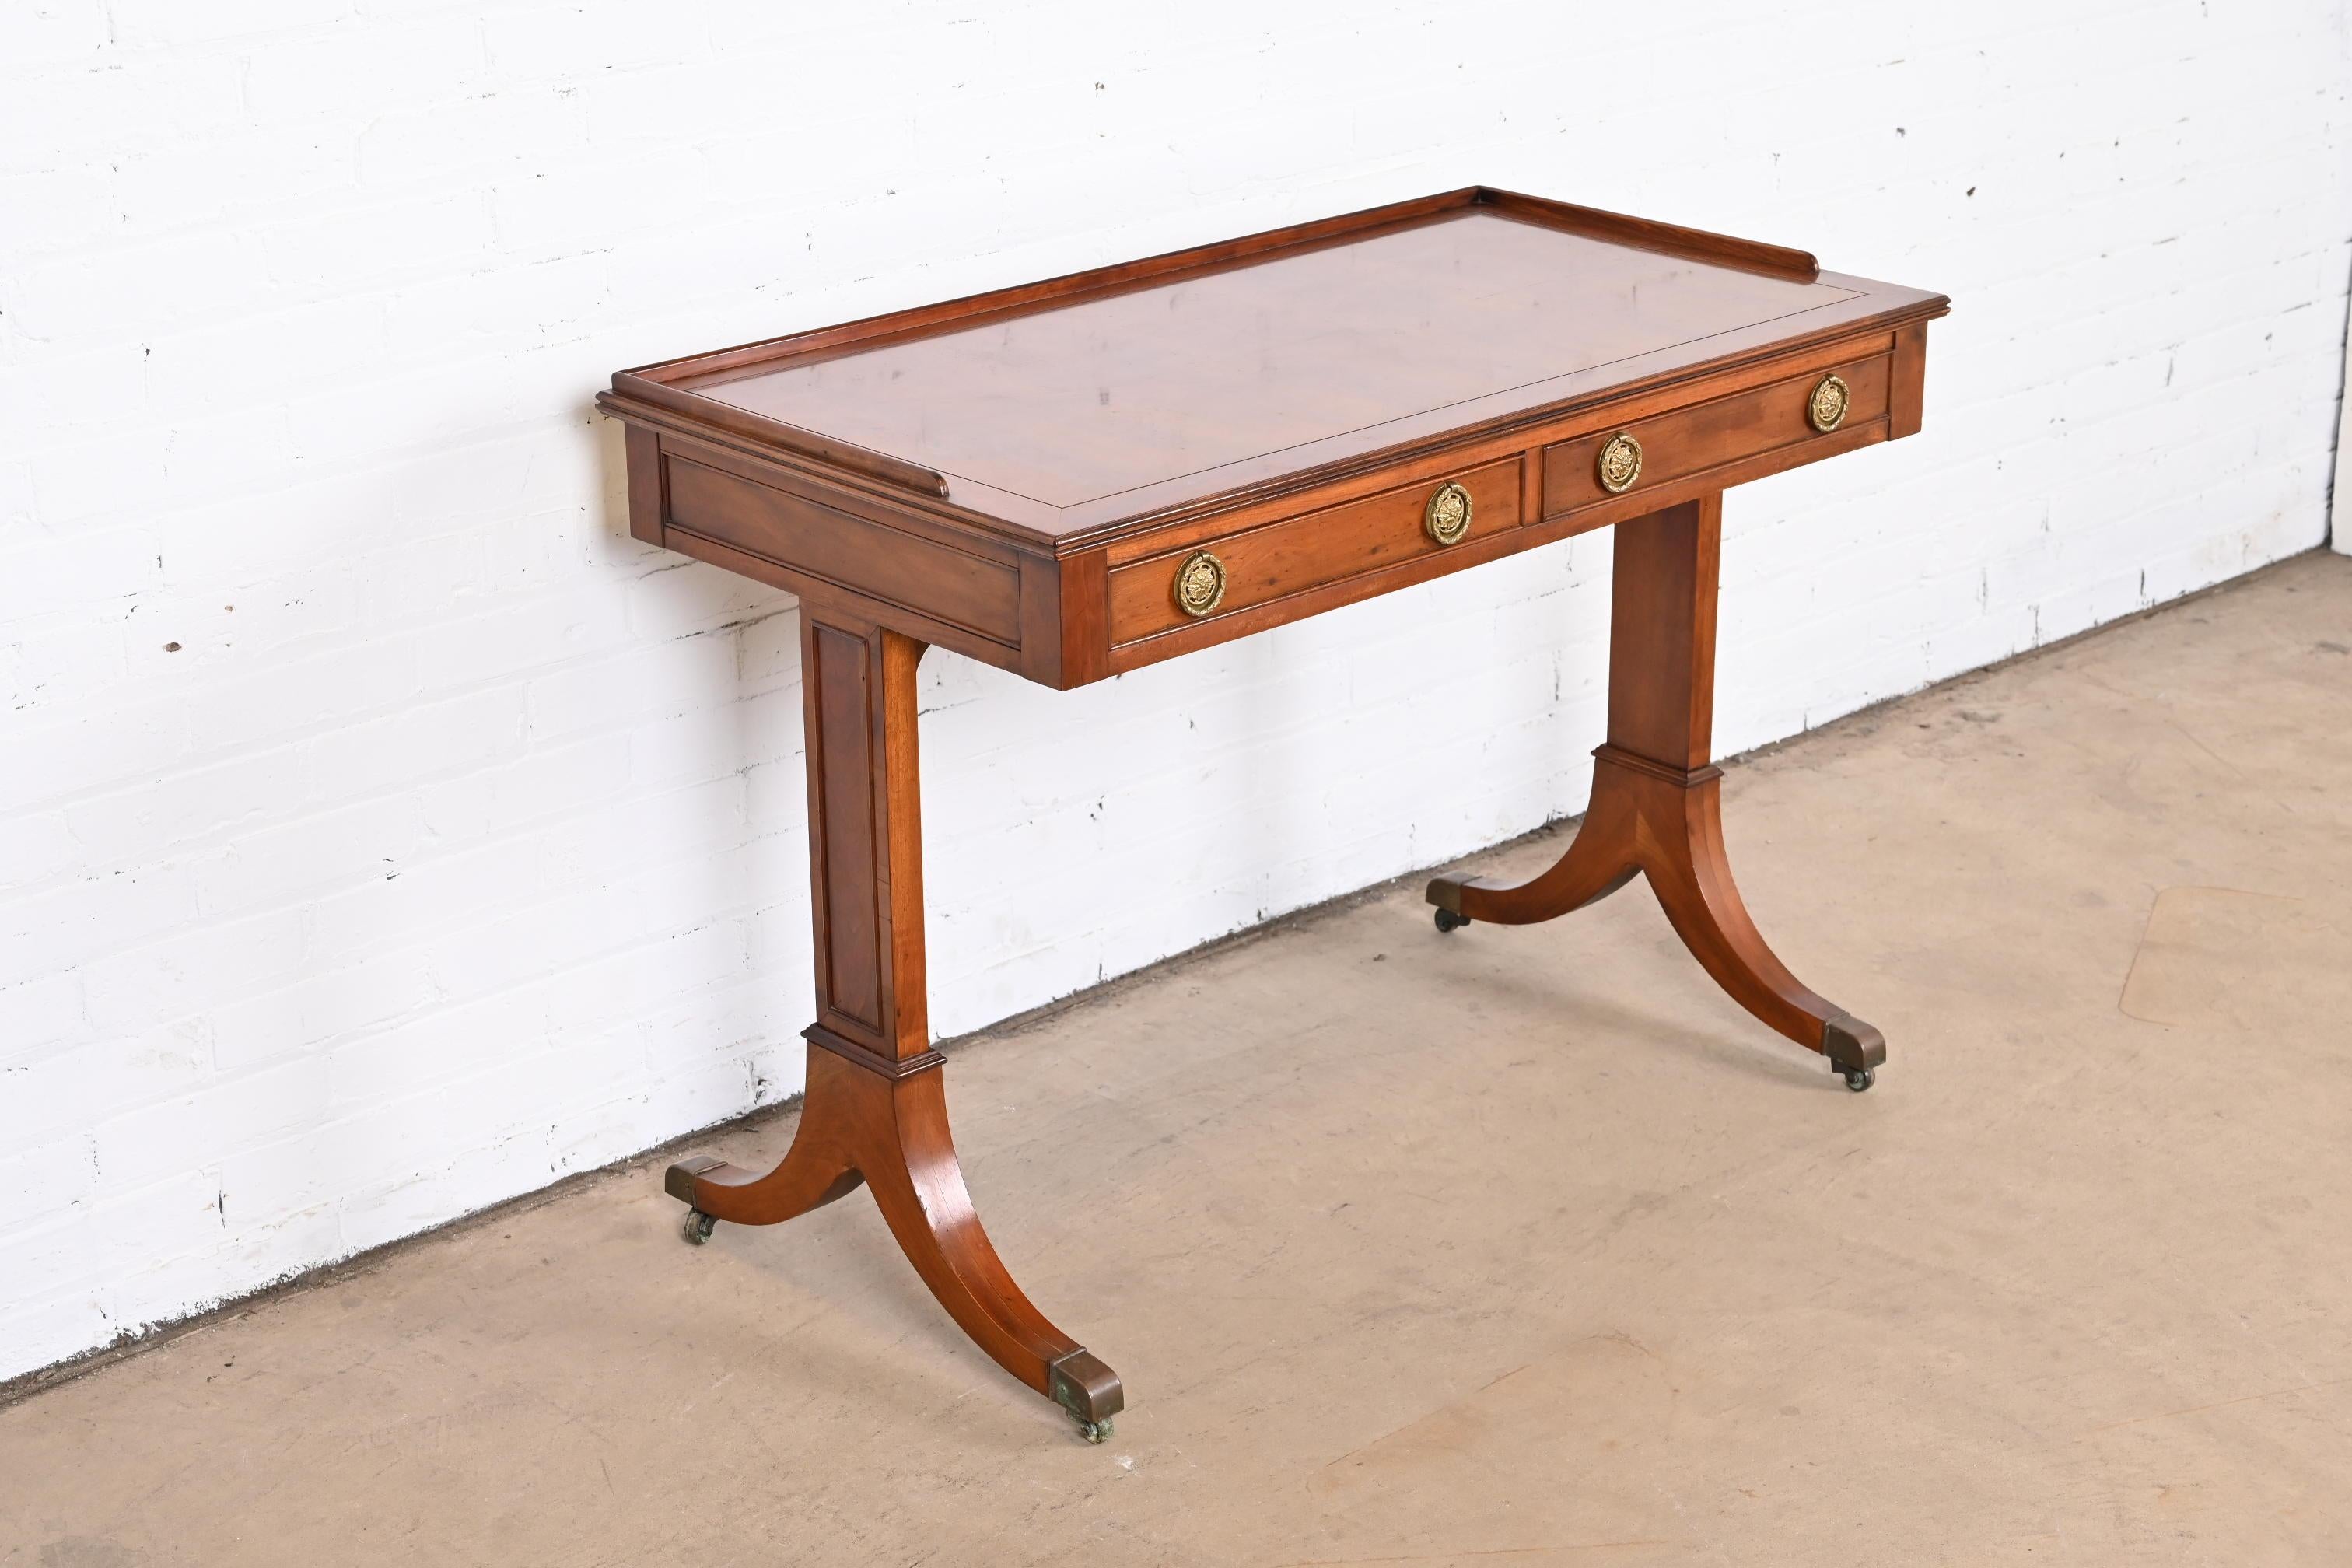 English Regency Yew Wood Desk or Console in the Manner of Baker Furniture 1